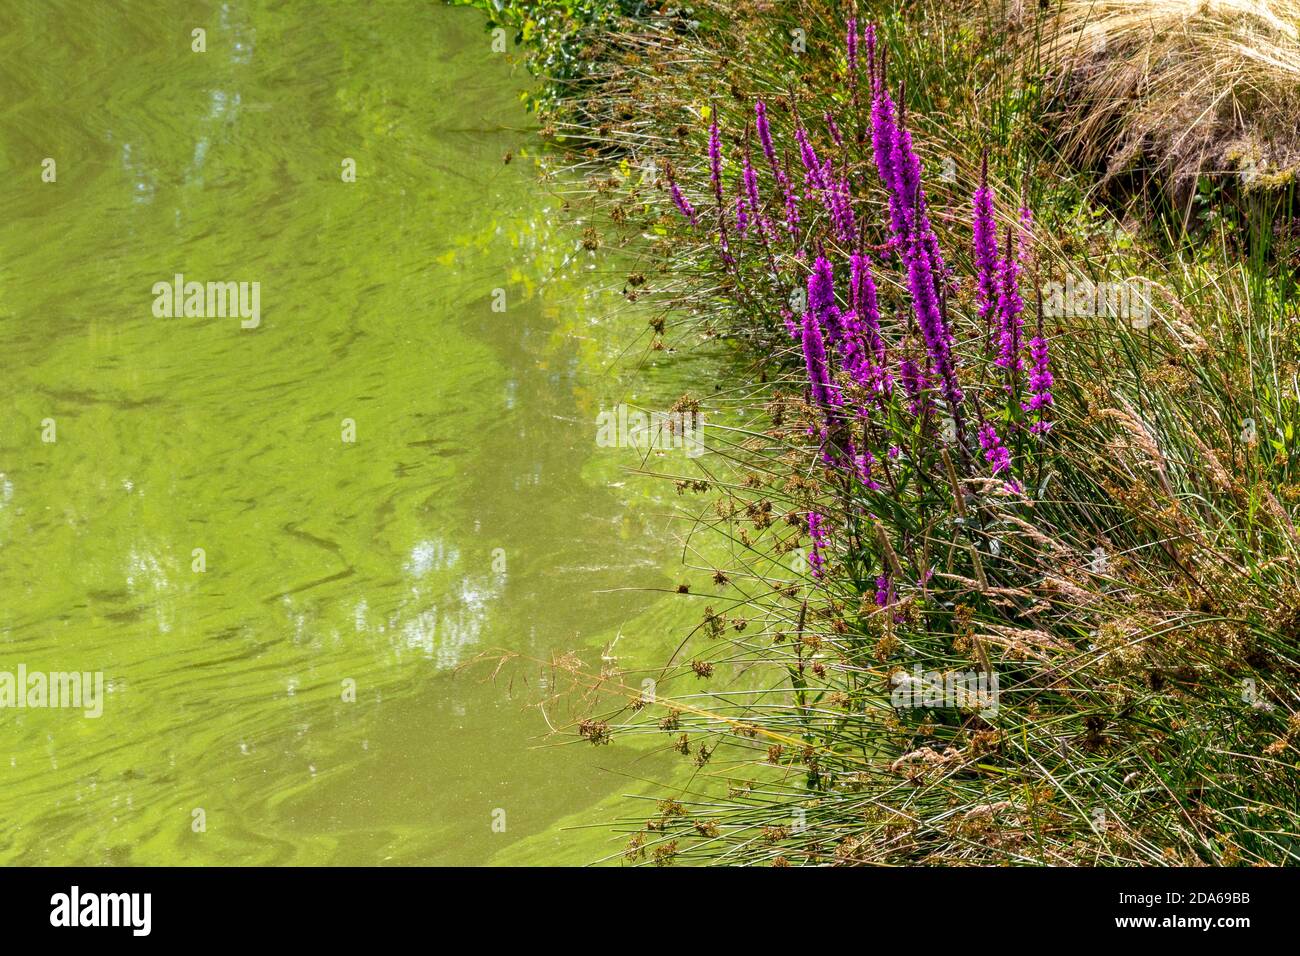 riparian scenery at a pond including some vibrant pink flowers Stock Photo